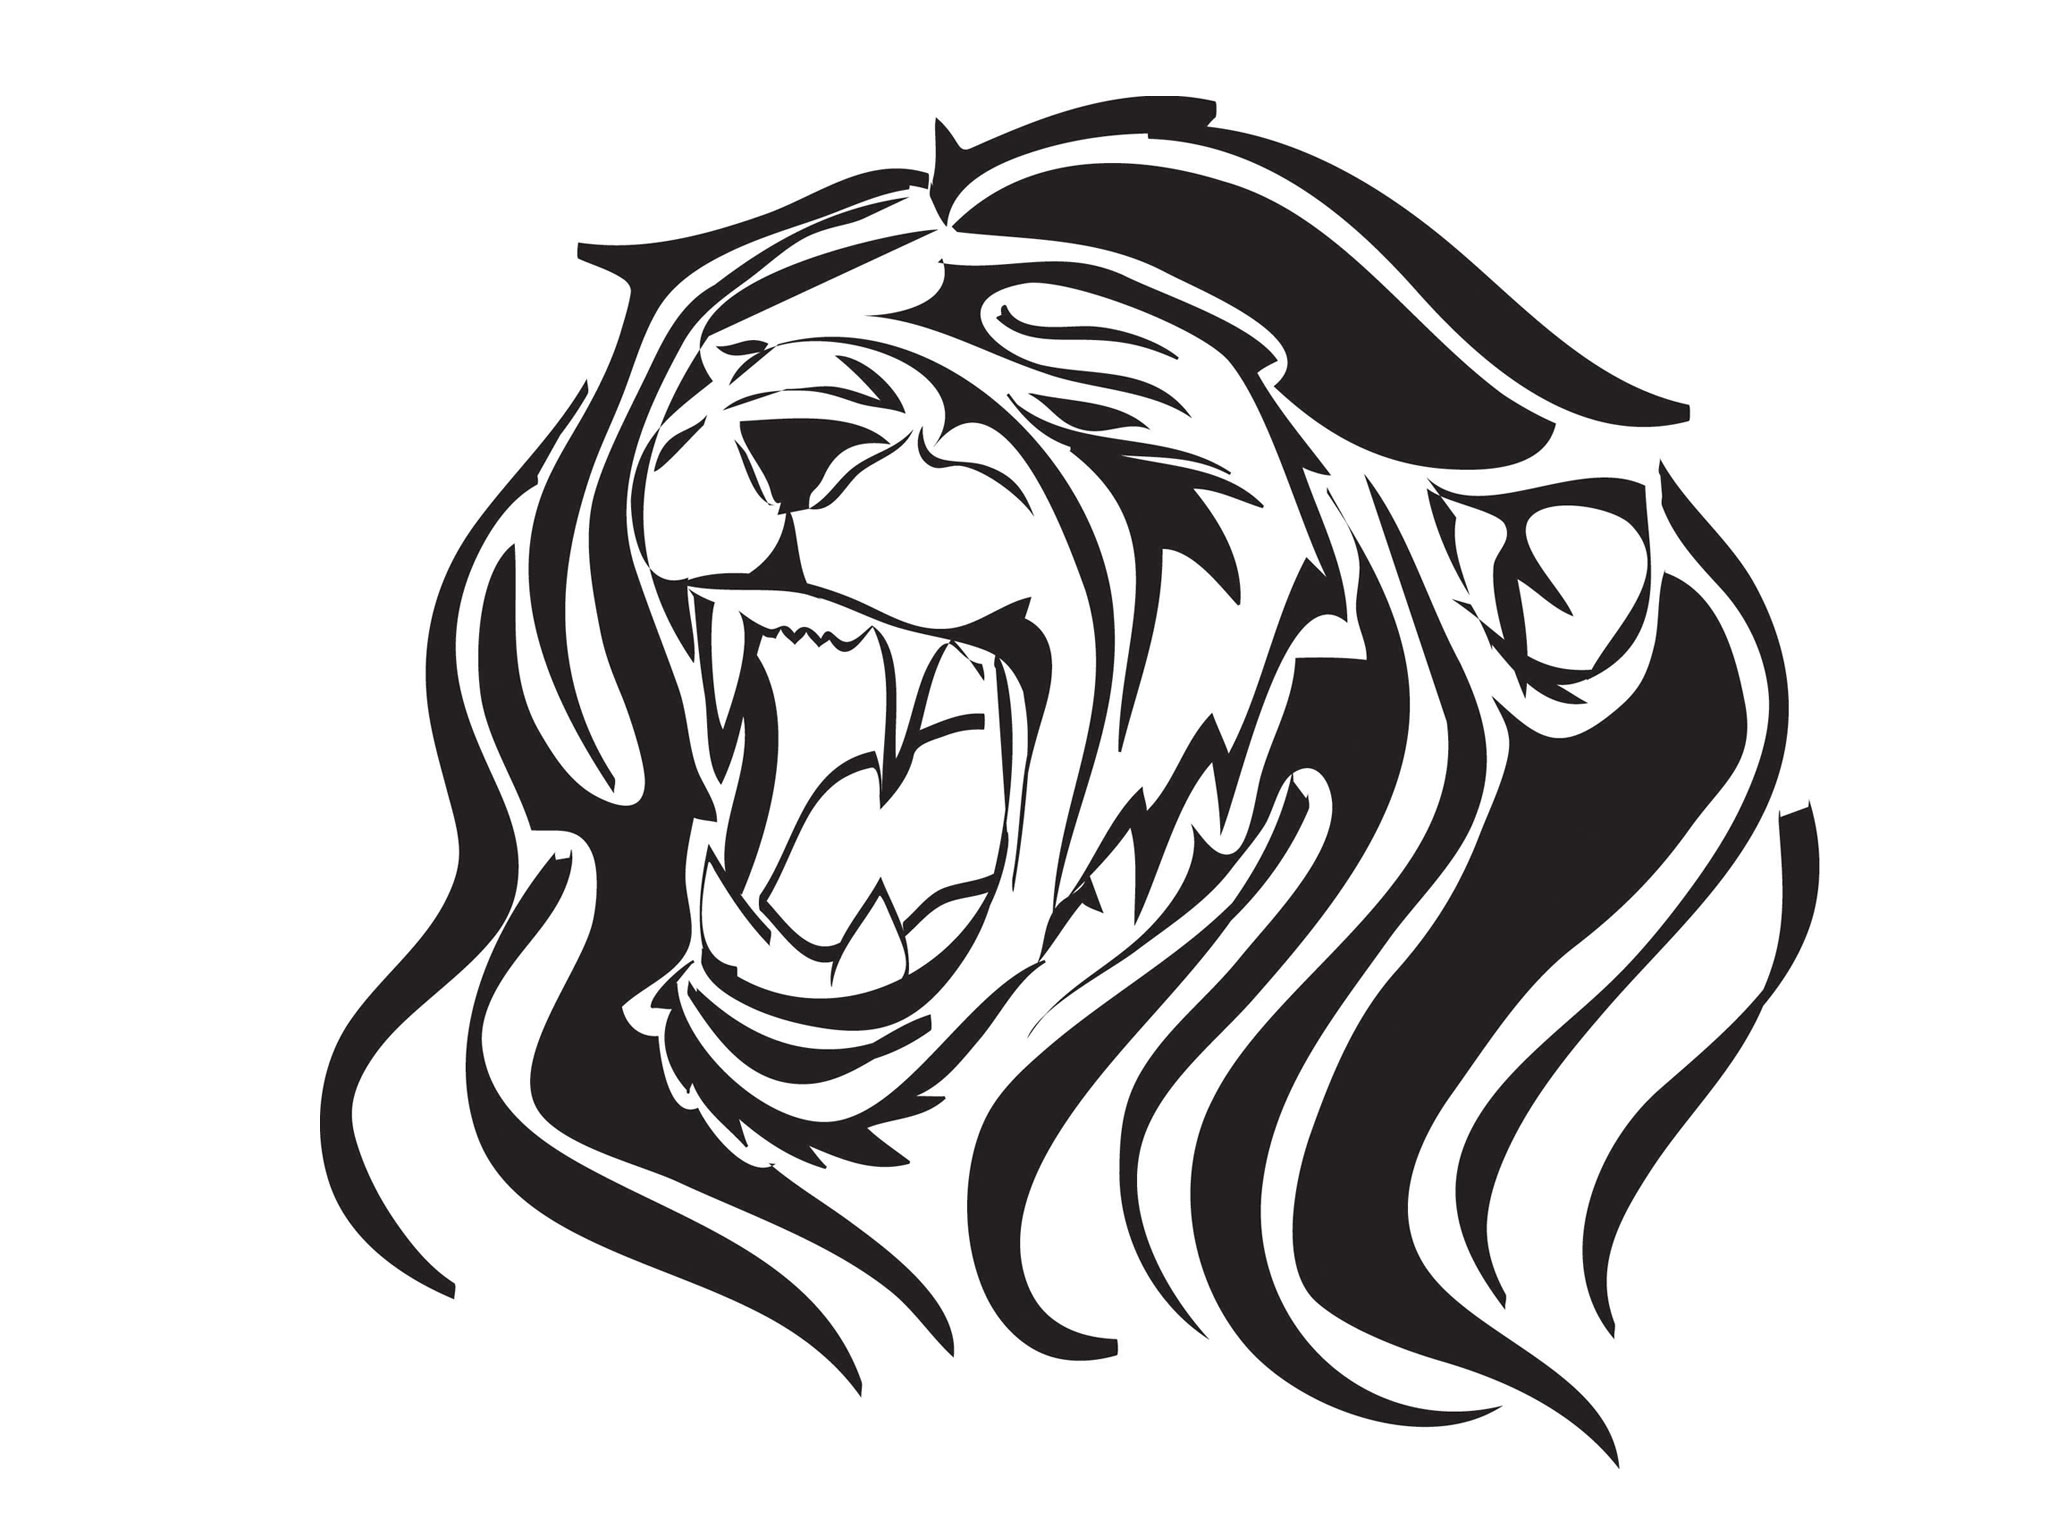 Images Of Roaring Lions - Clipart library